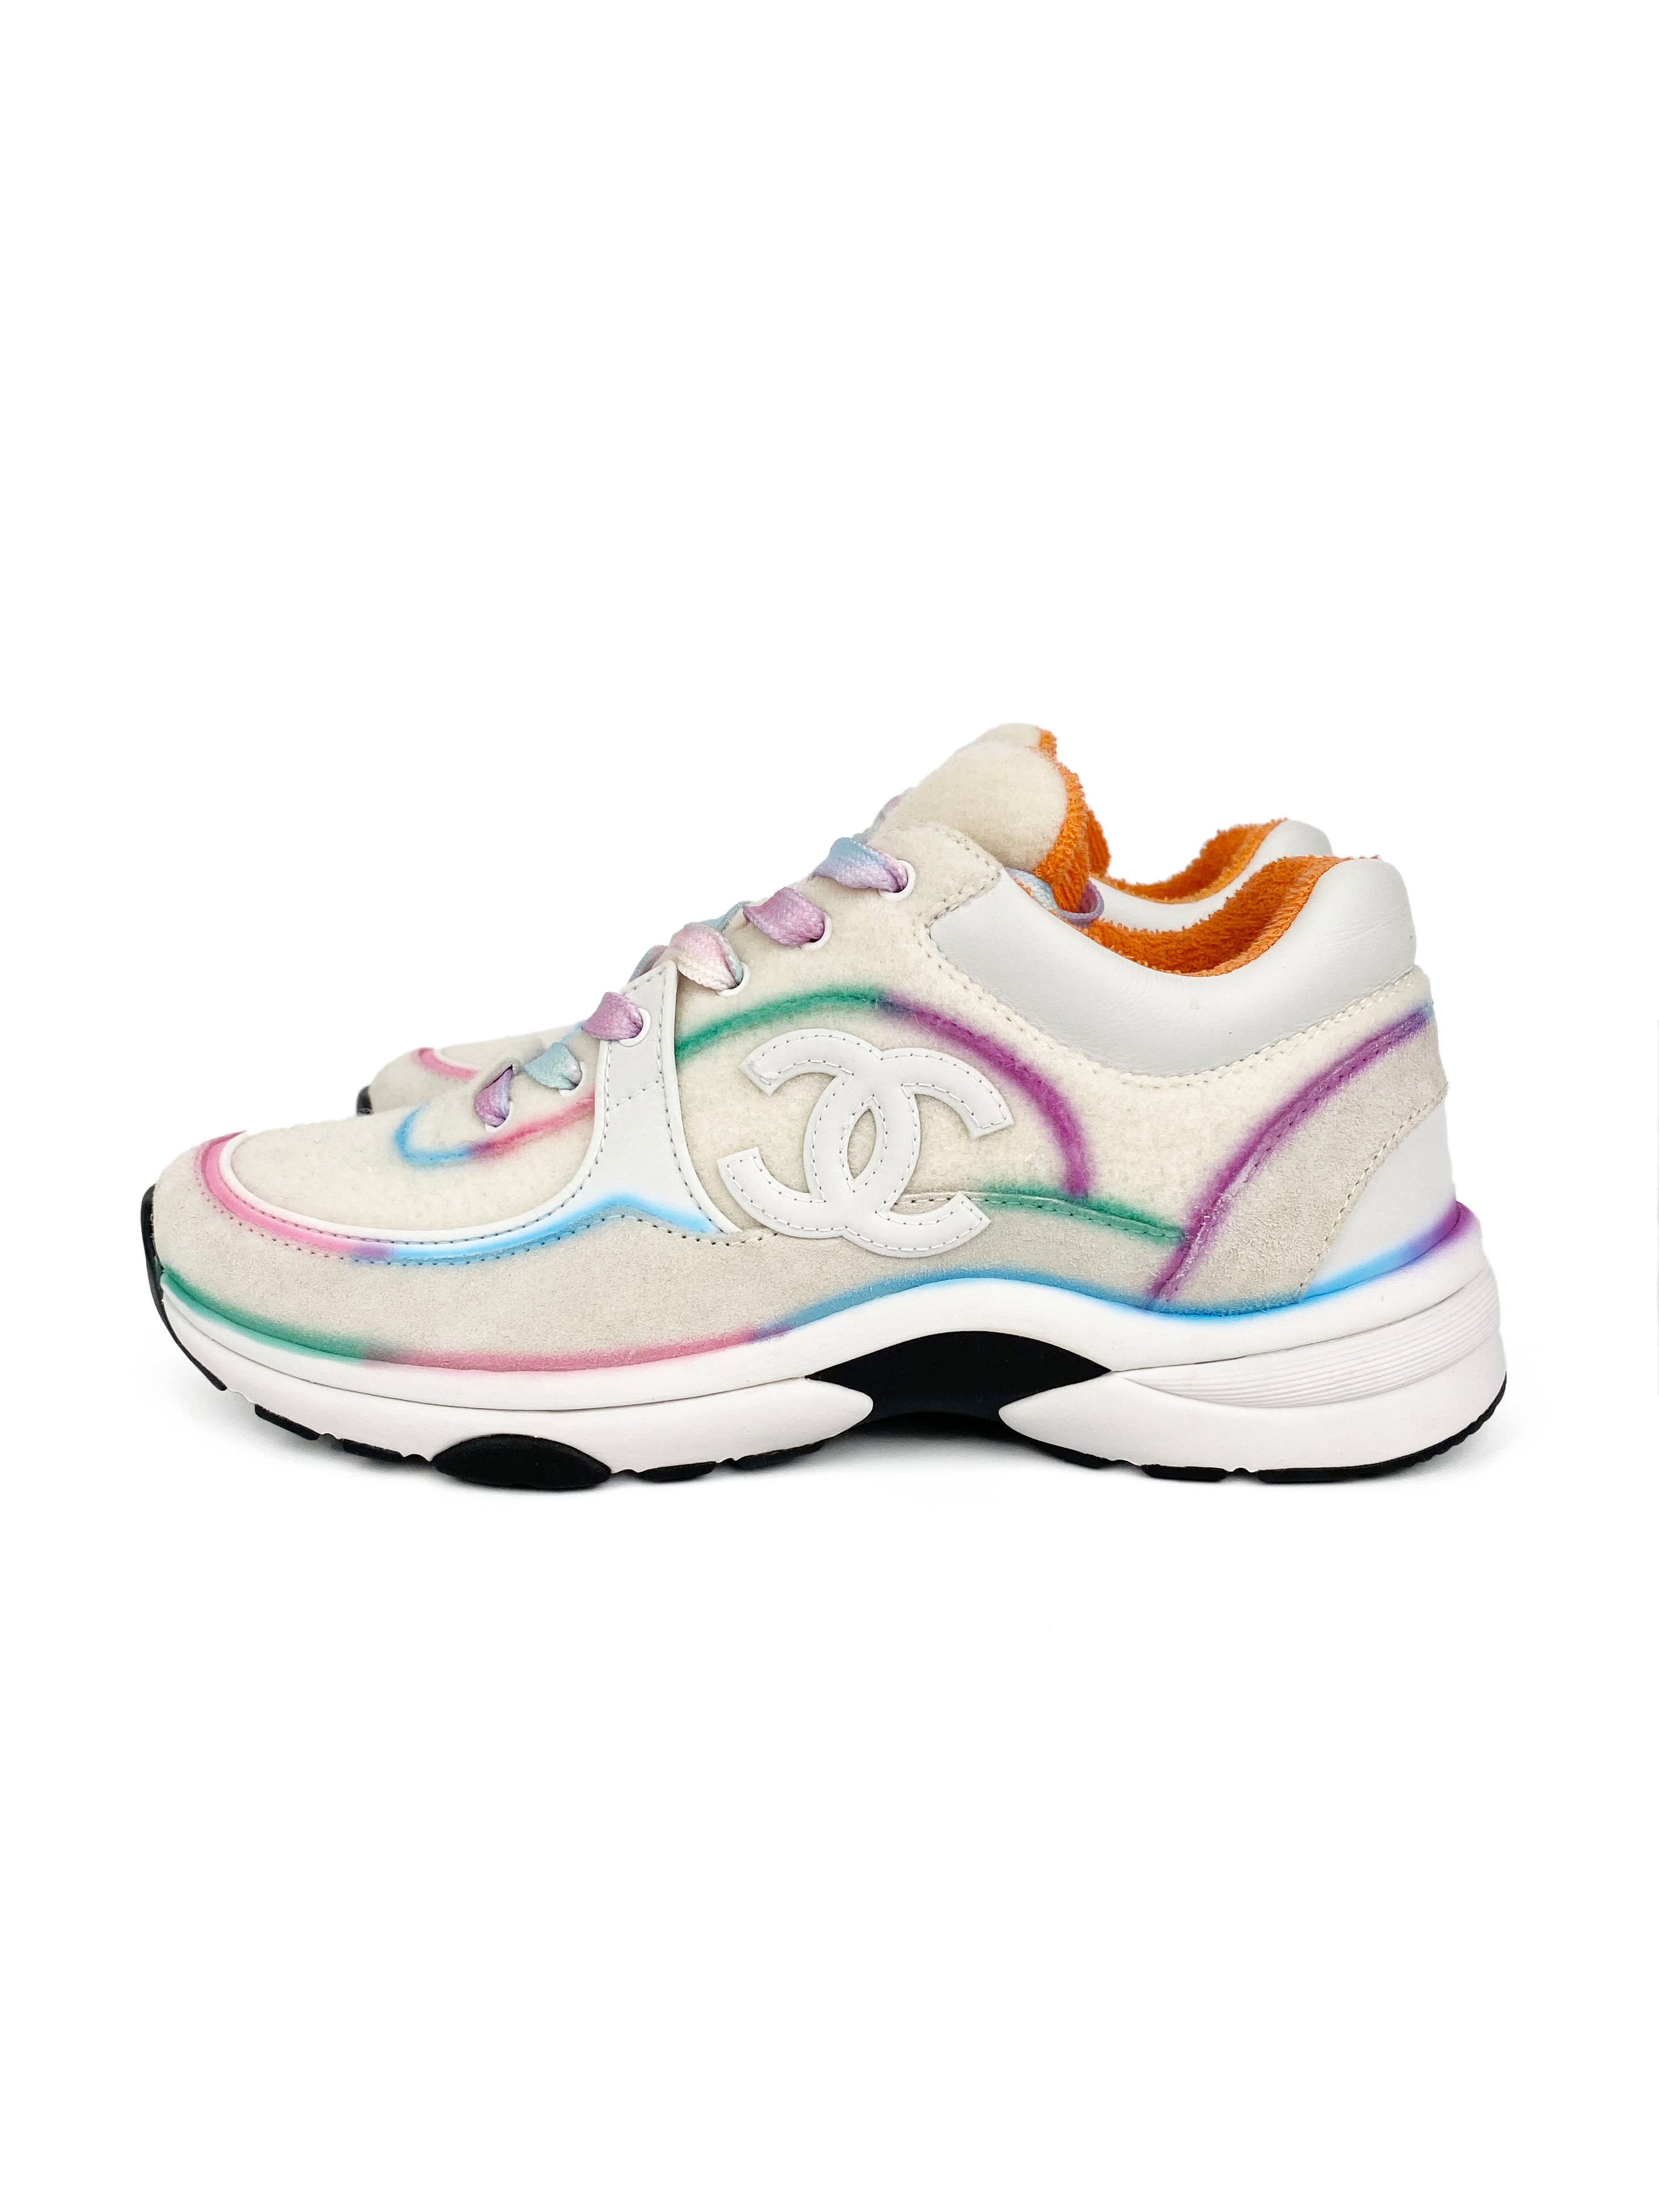 ChanelWhite_MulticolourSuedeSneakers38-1.jpg